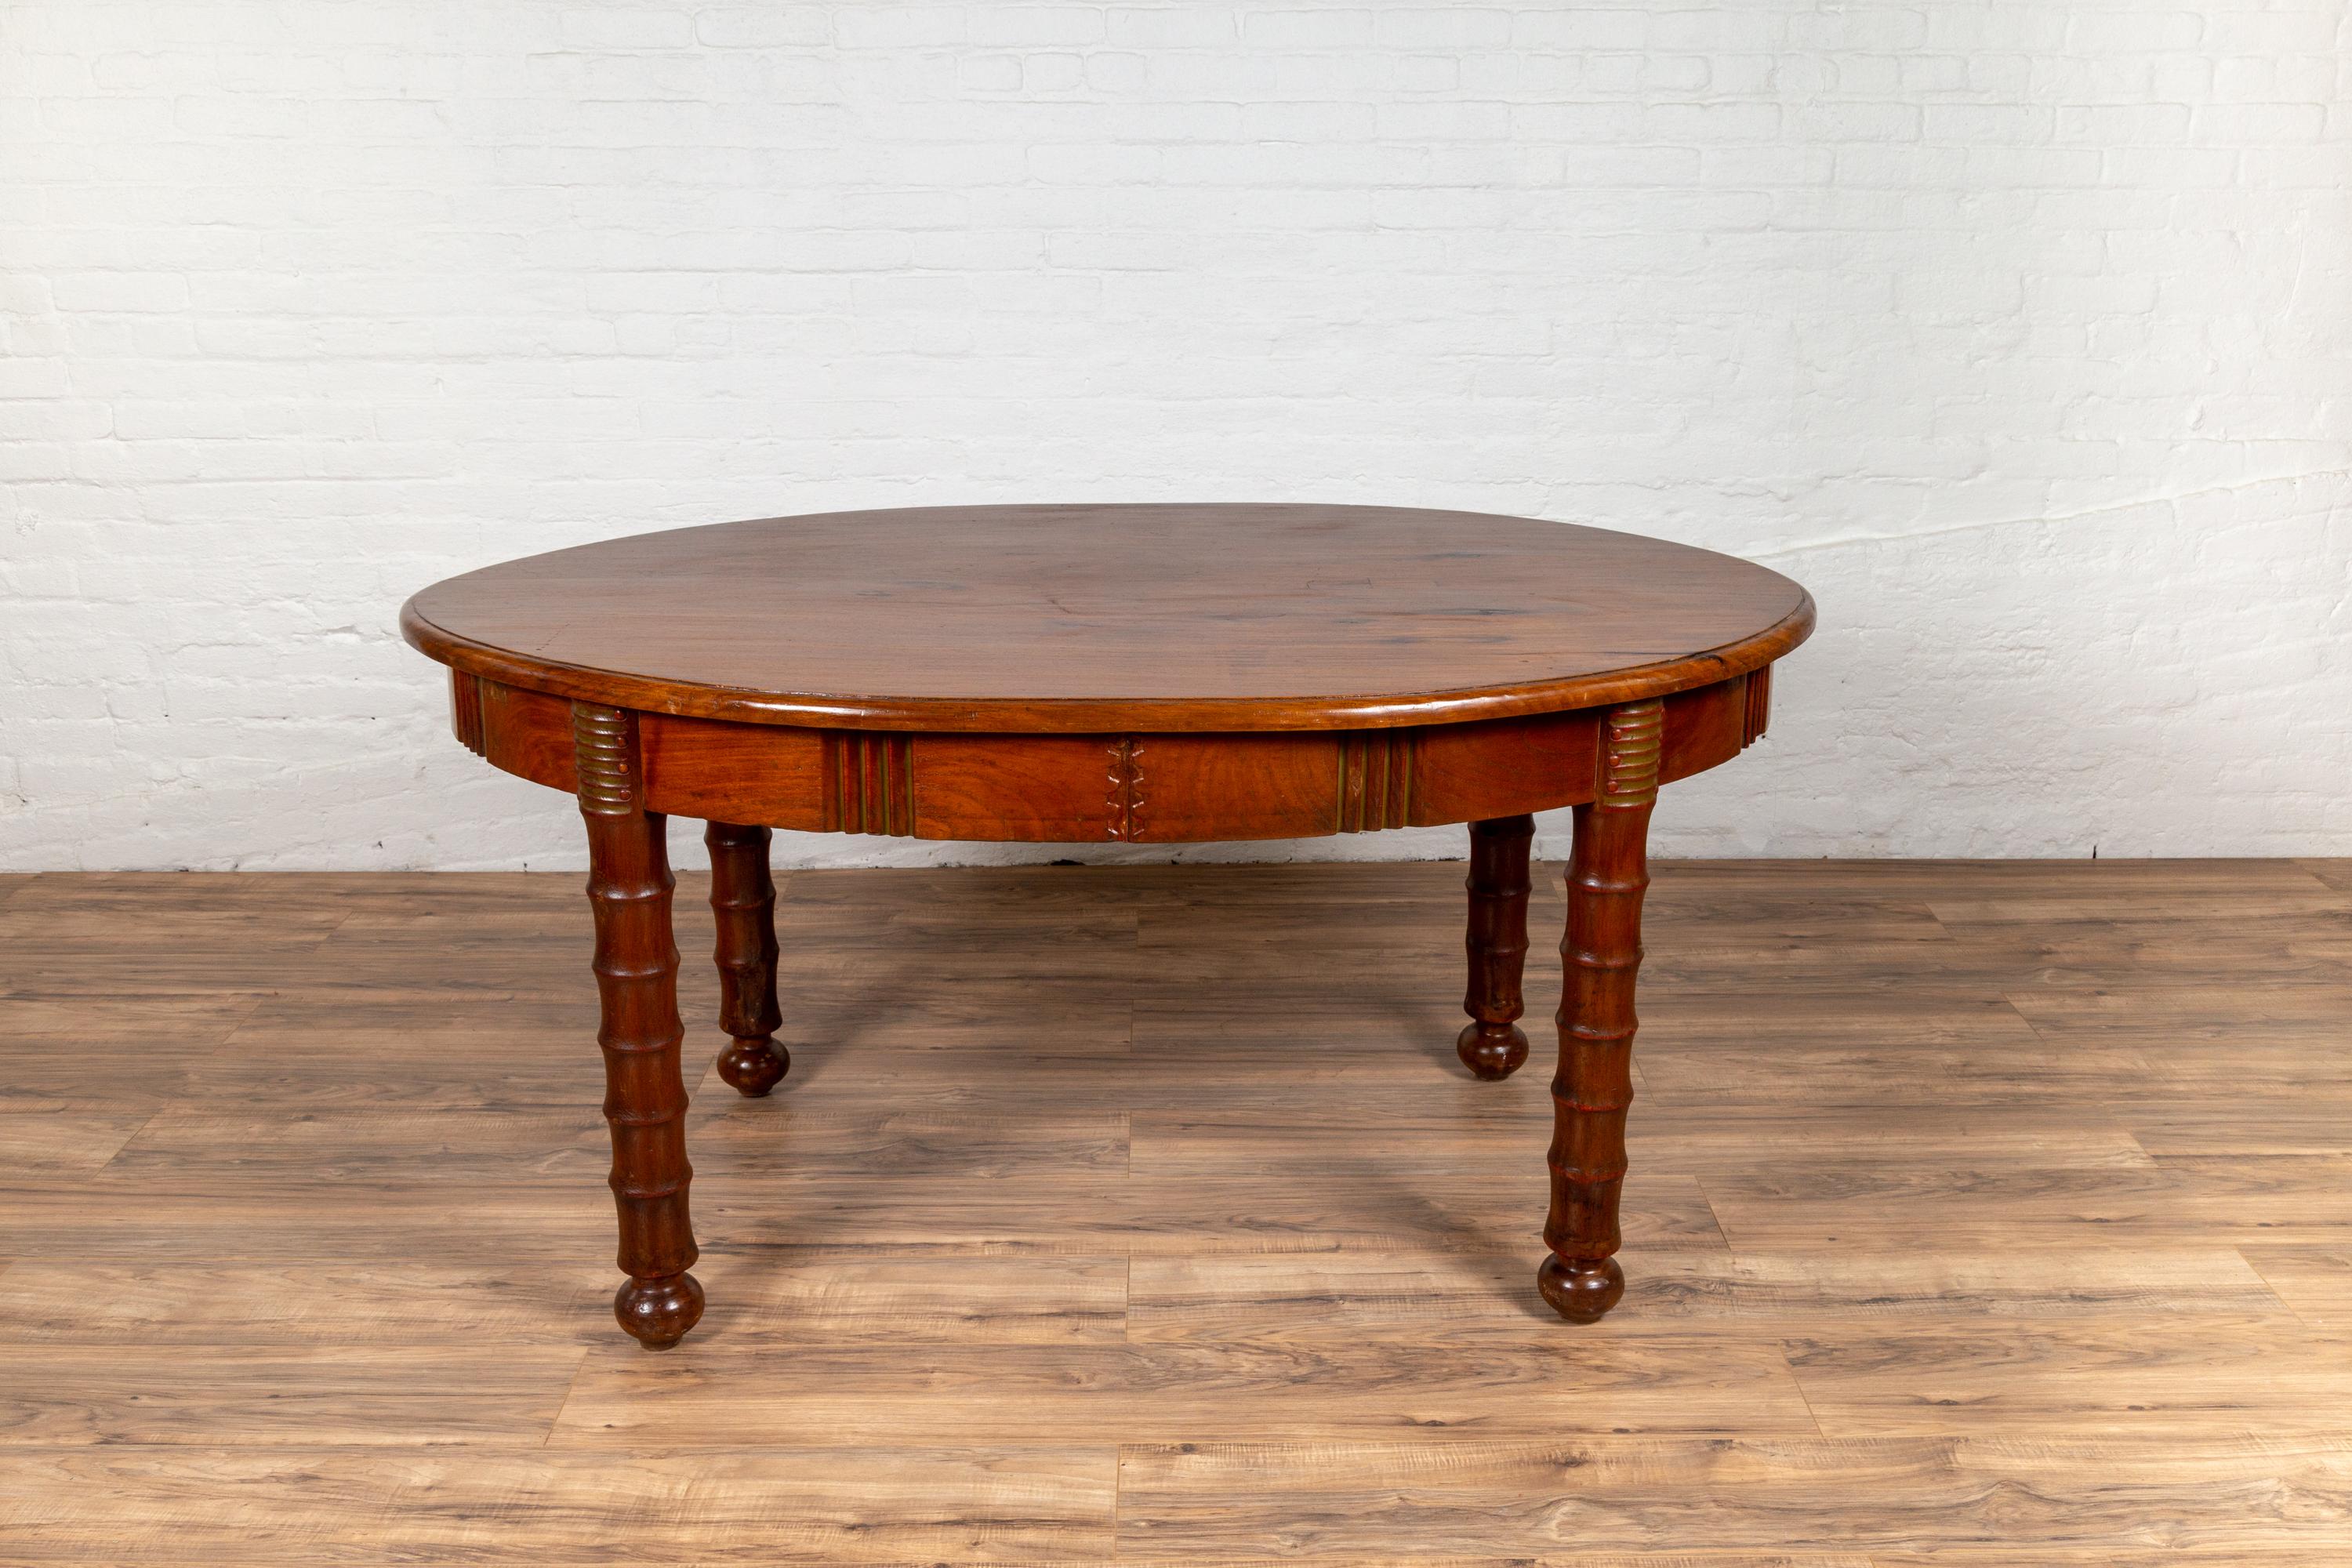 Antique Oval Dining Room Table from Indonesia with Spindle Legs and Warm Patina For Sale 7